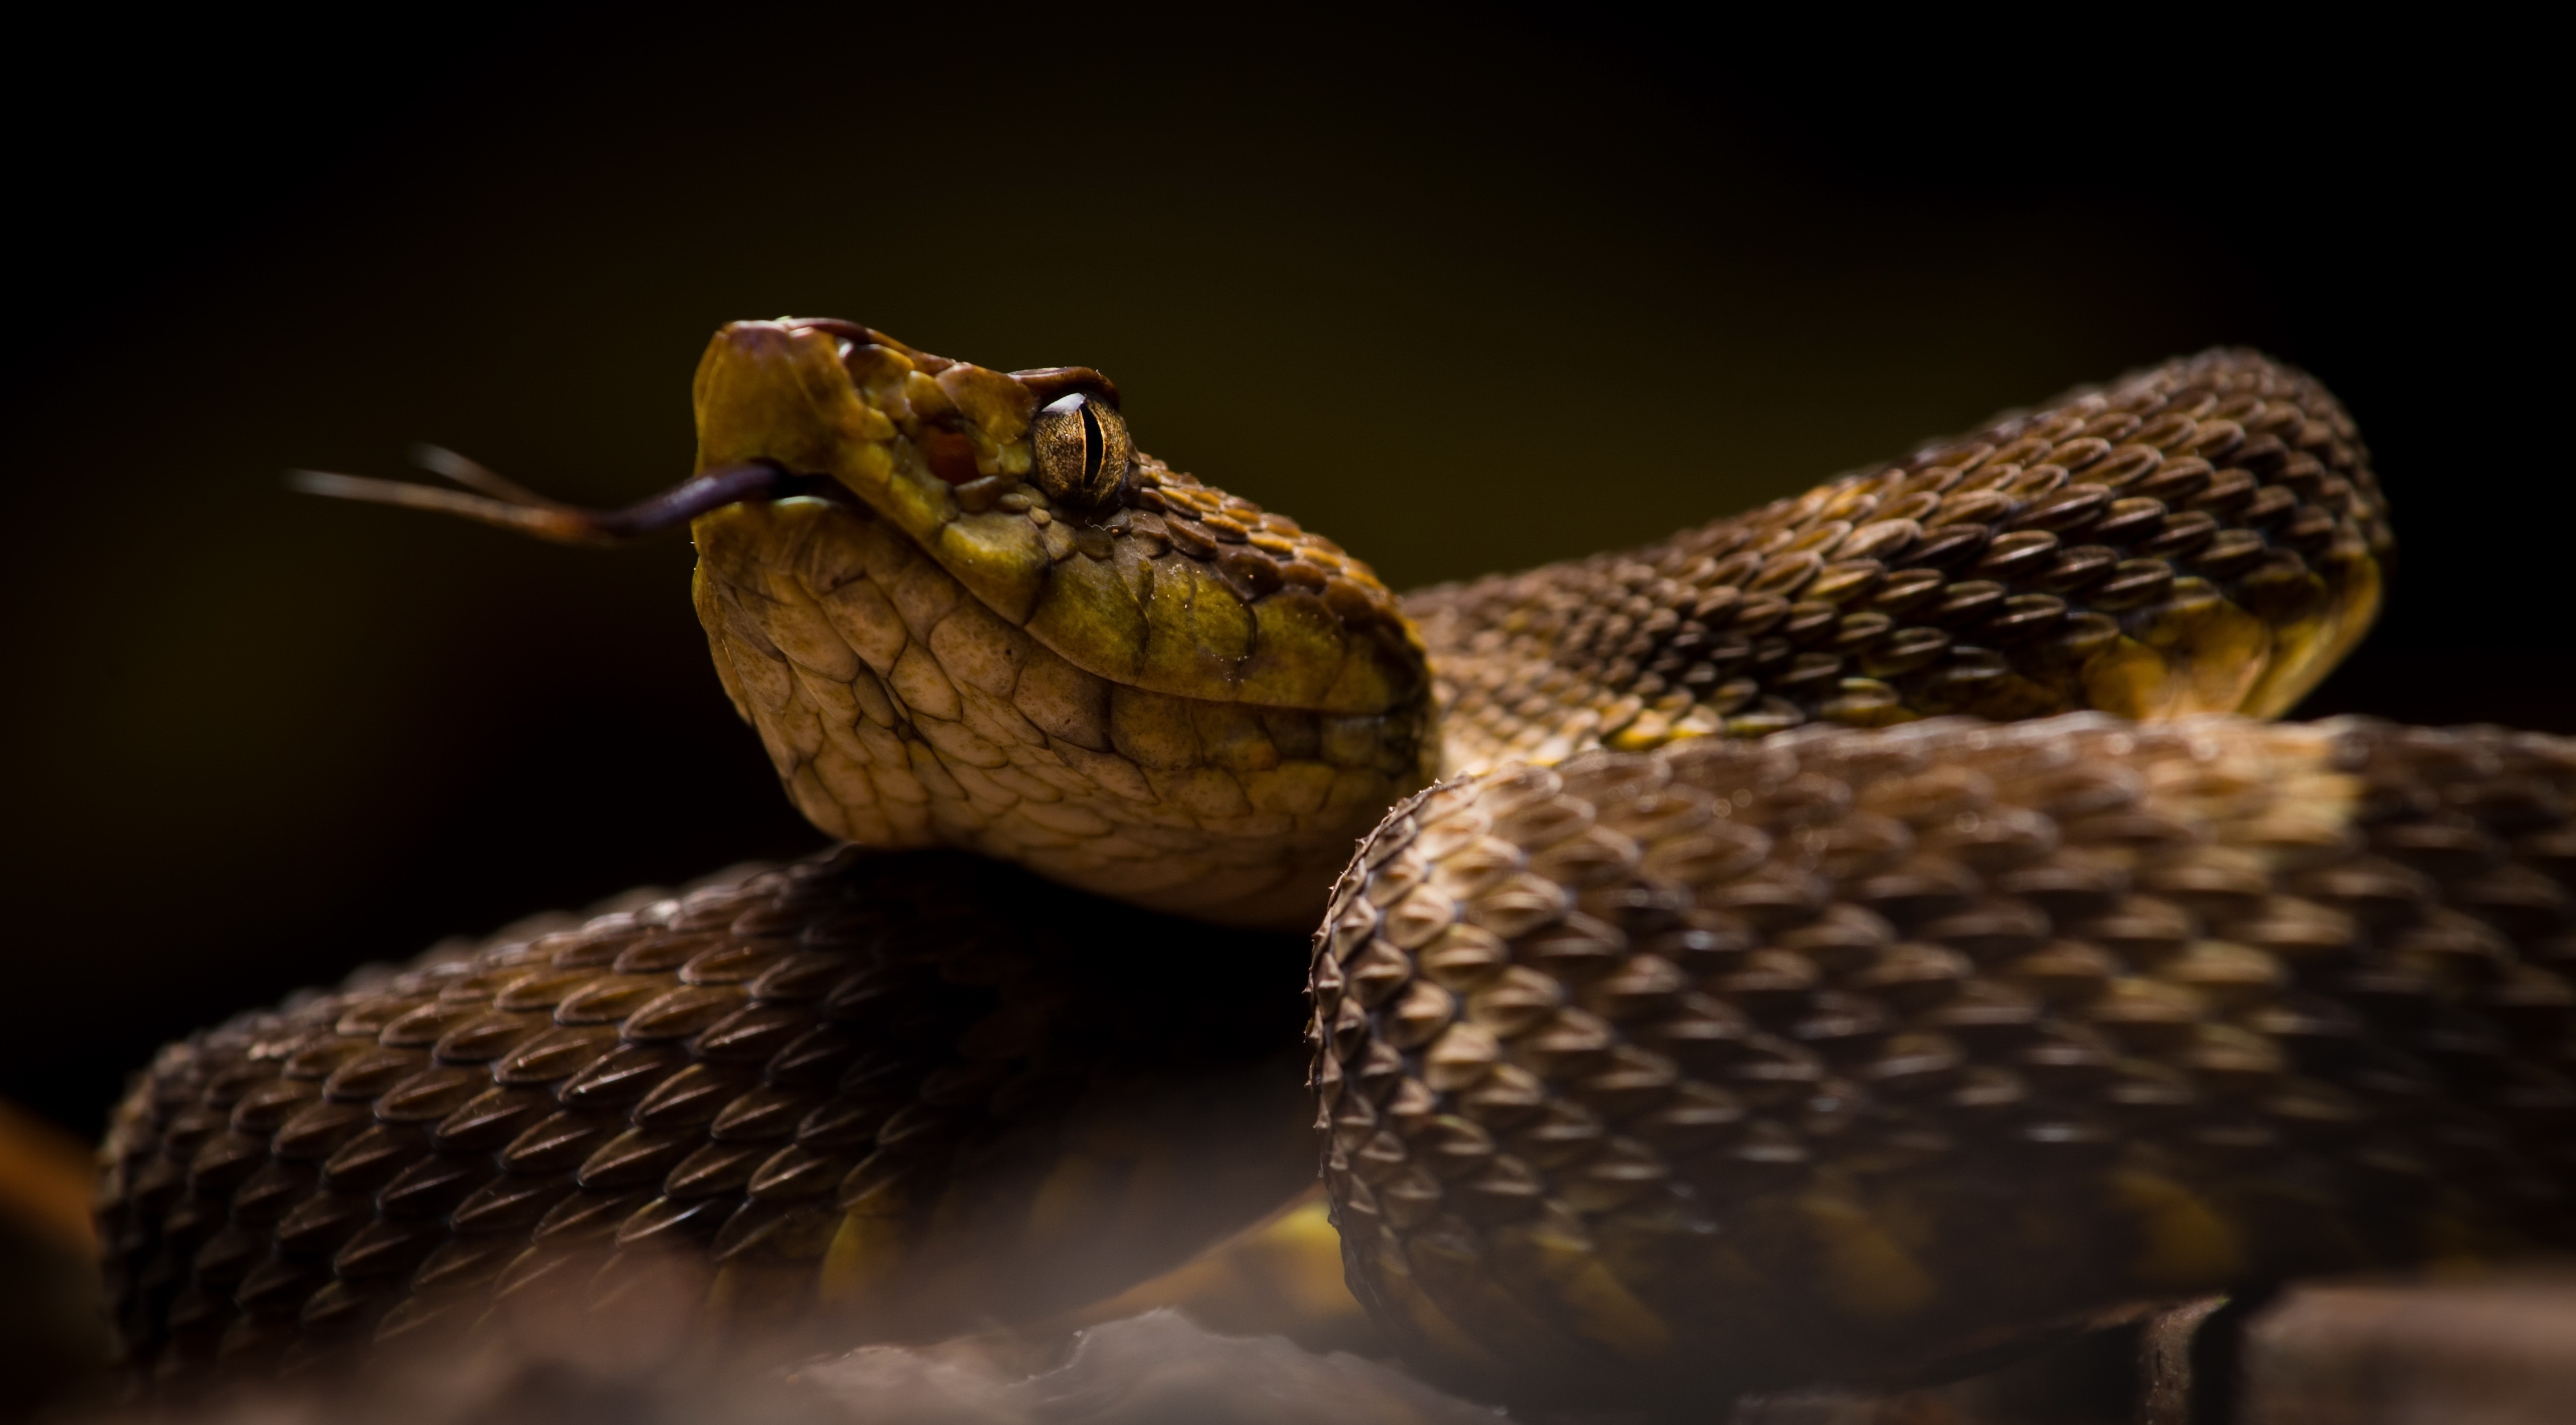 Close Up Pit Viper Reptile Snake Wildlife 4527x2504